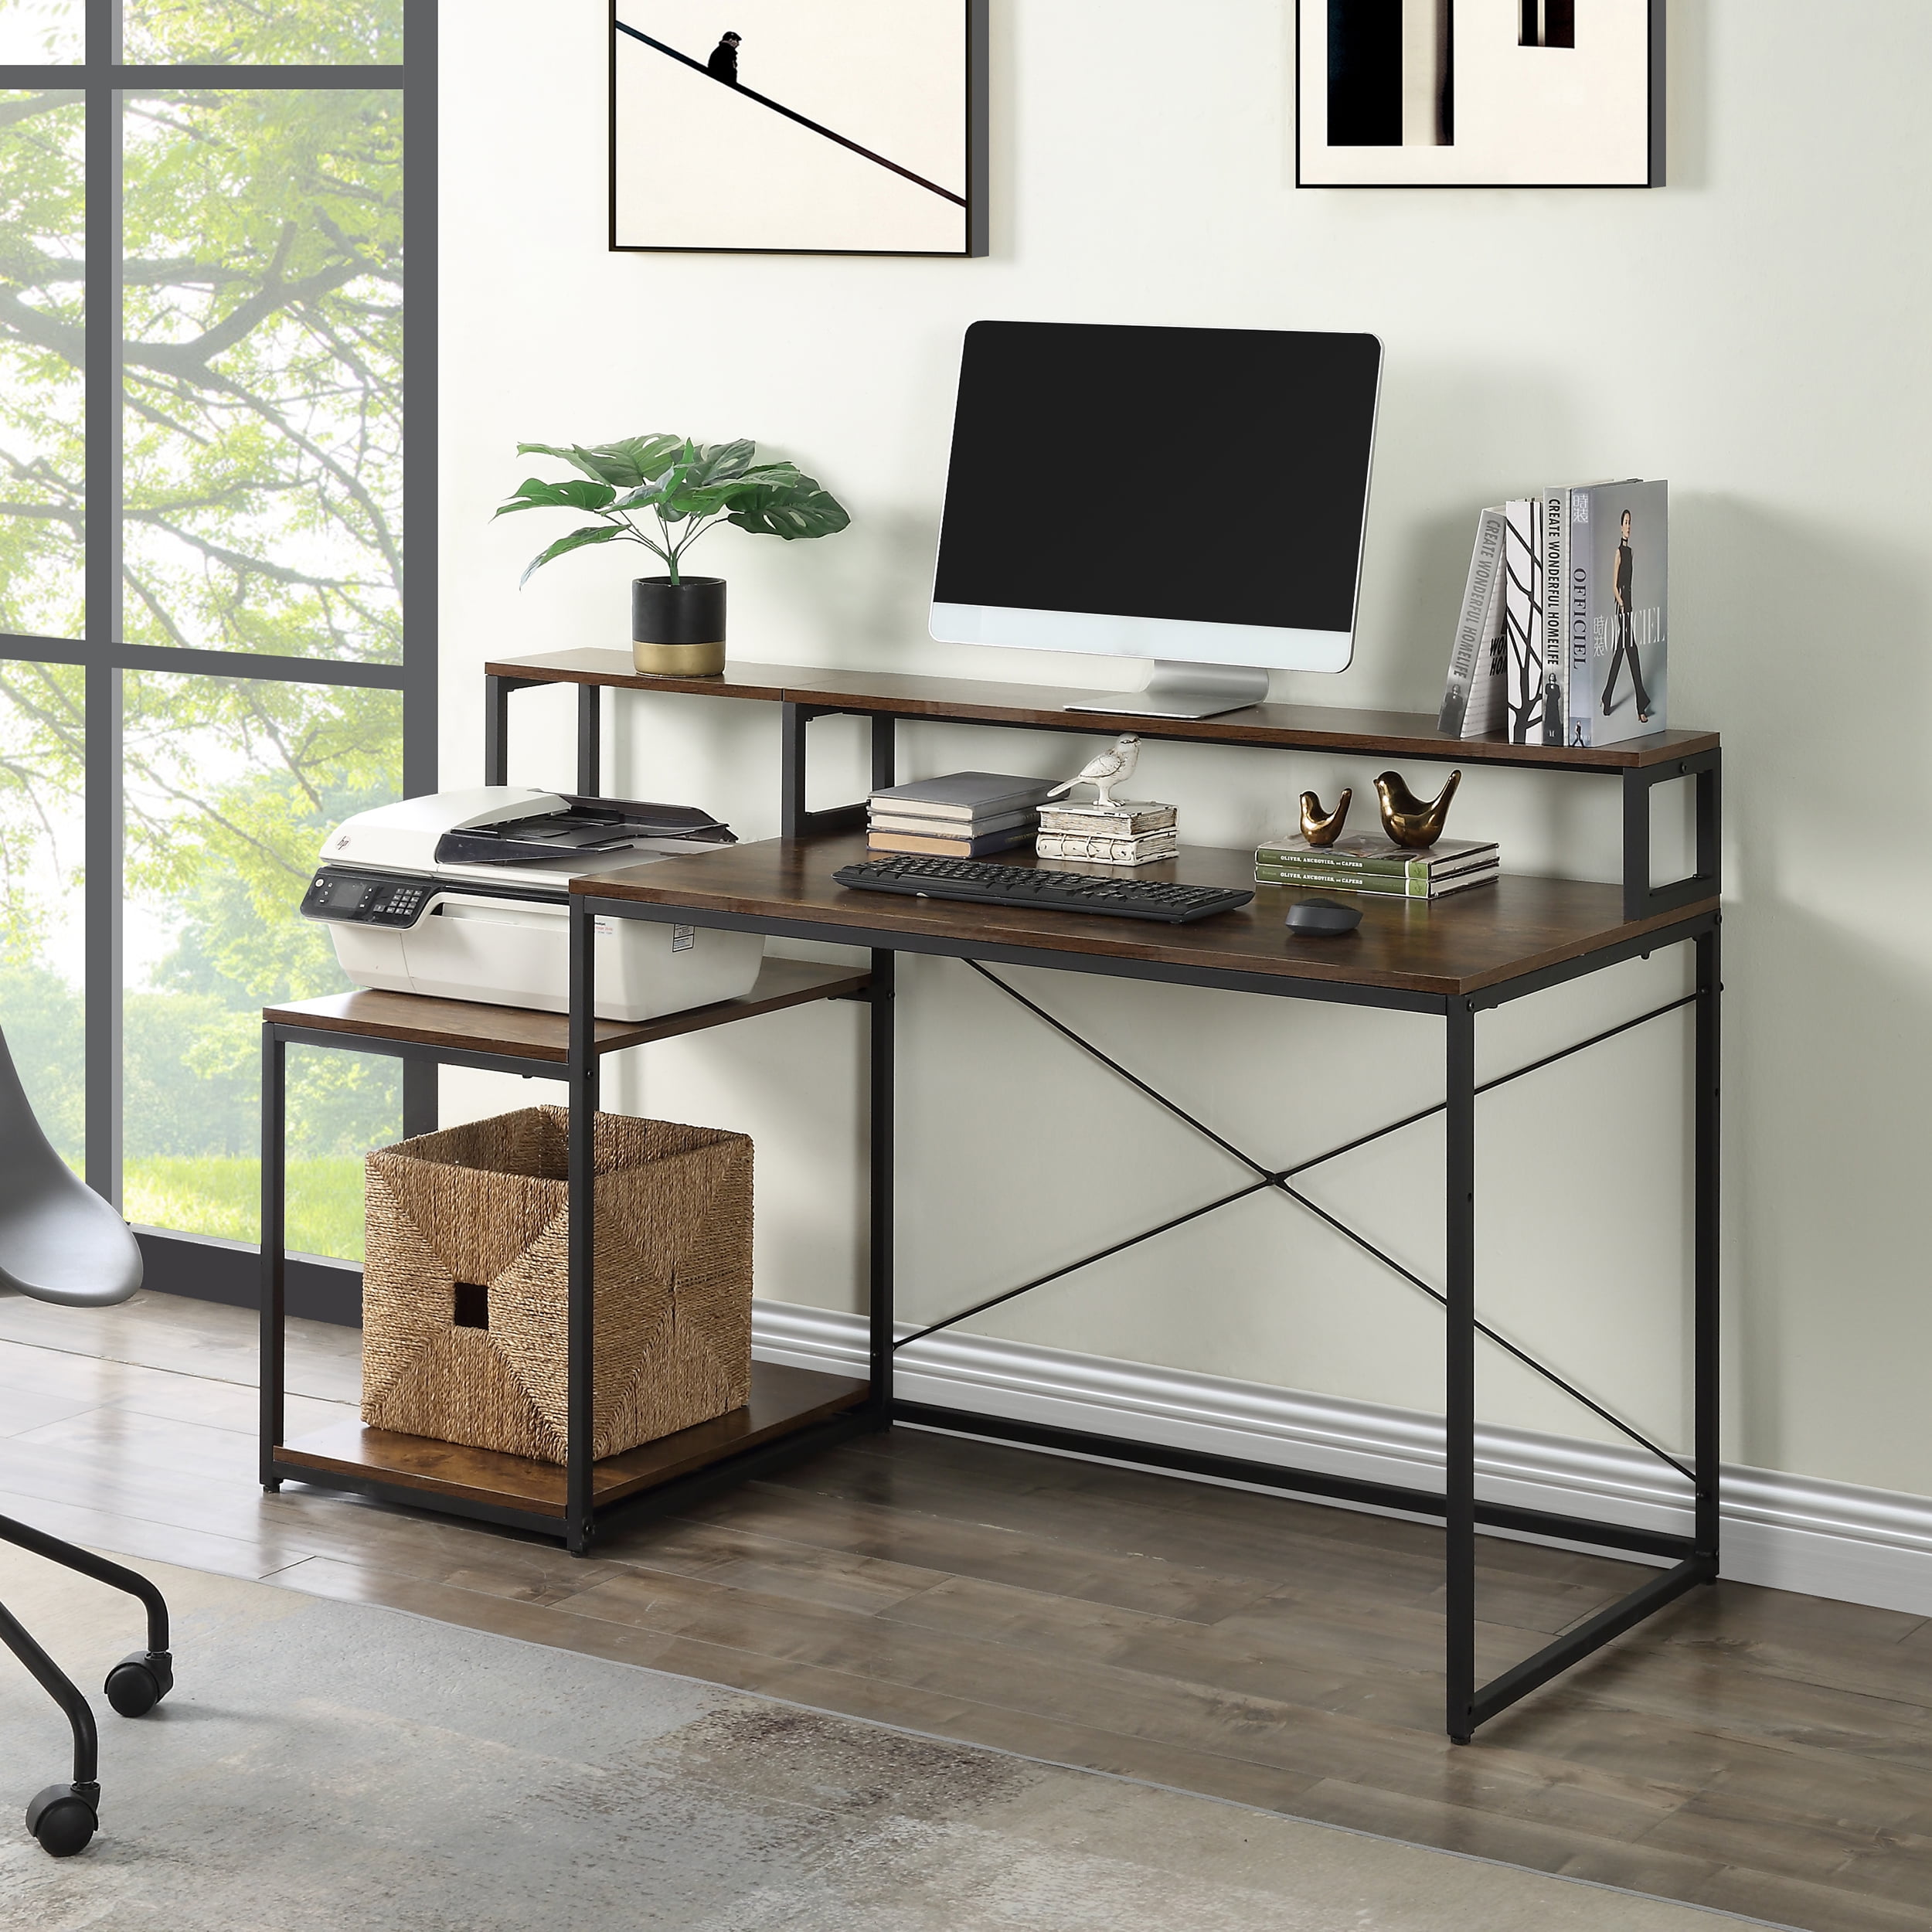 Details about   Folding Computer Desk Modern Simple Writing Table For Home Office Study 47” Long 